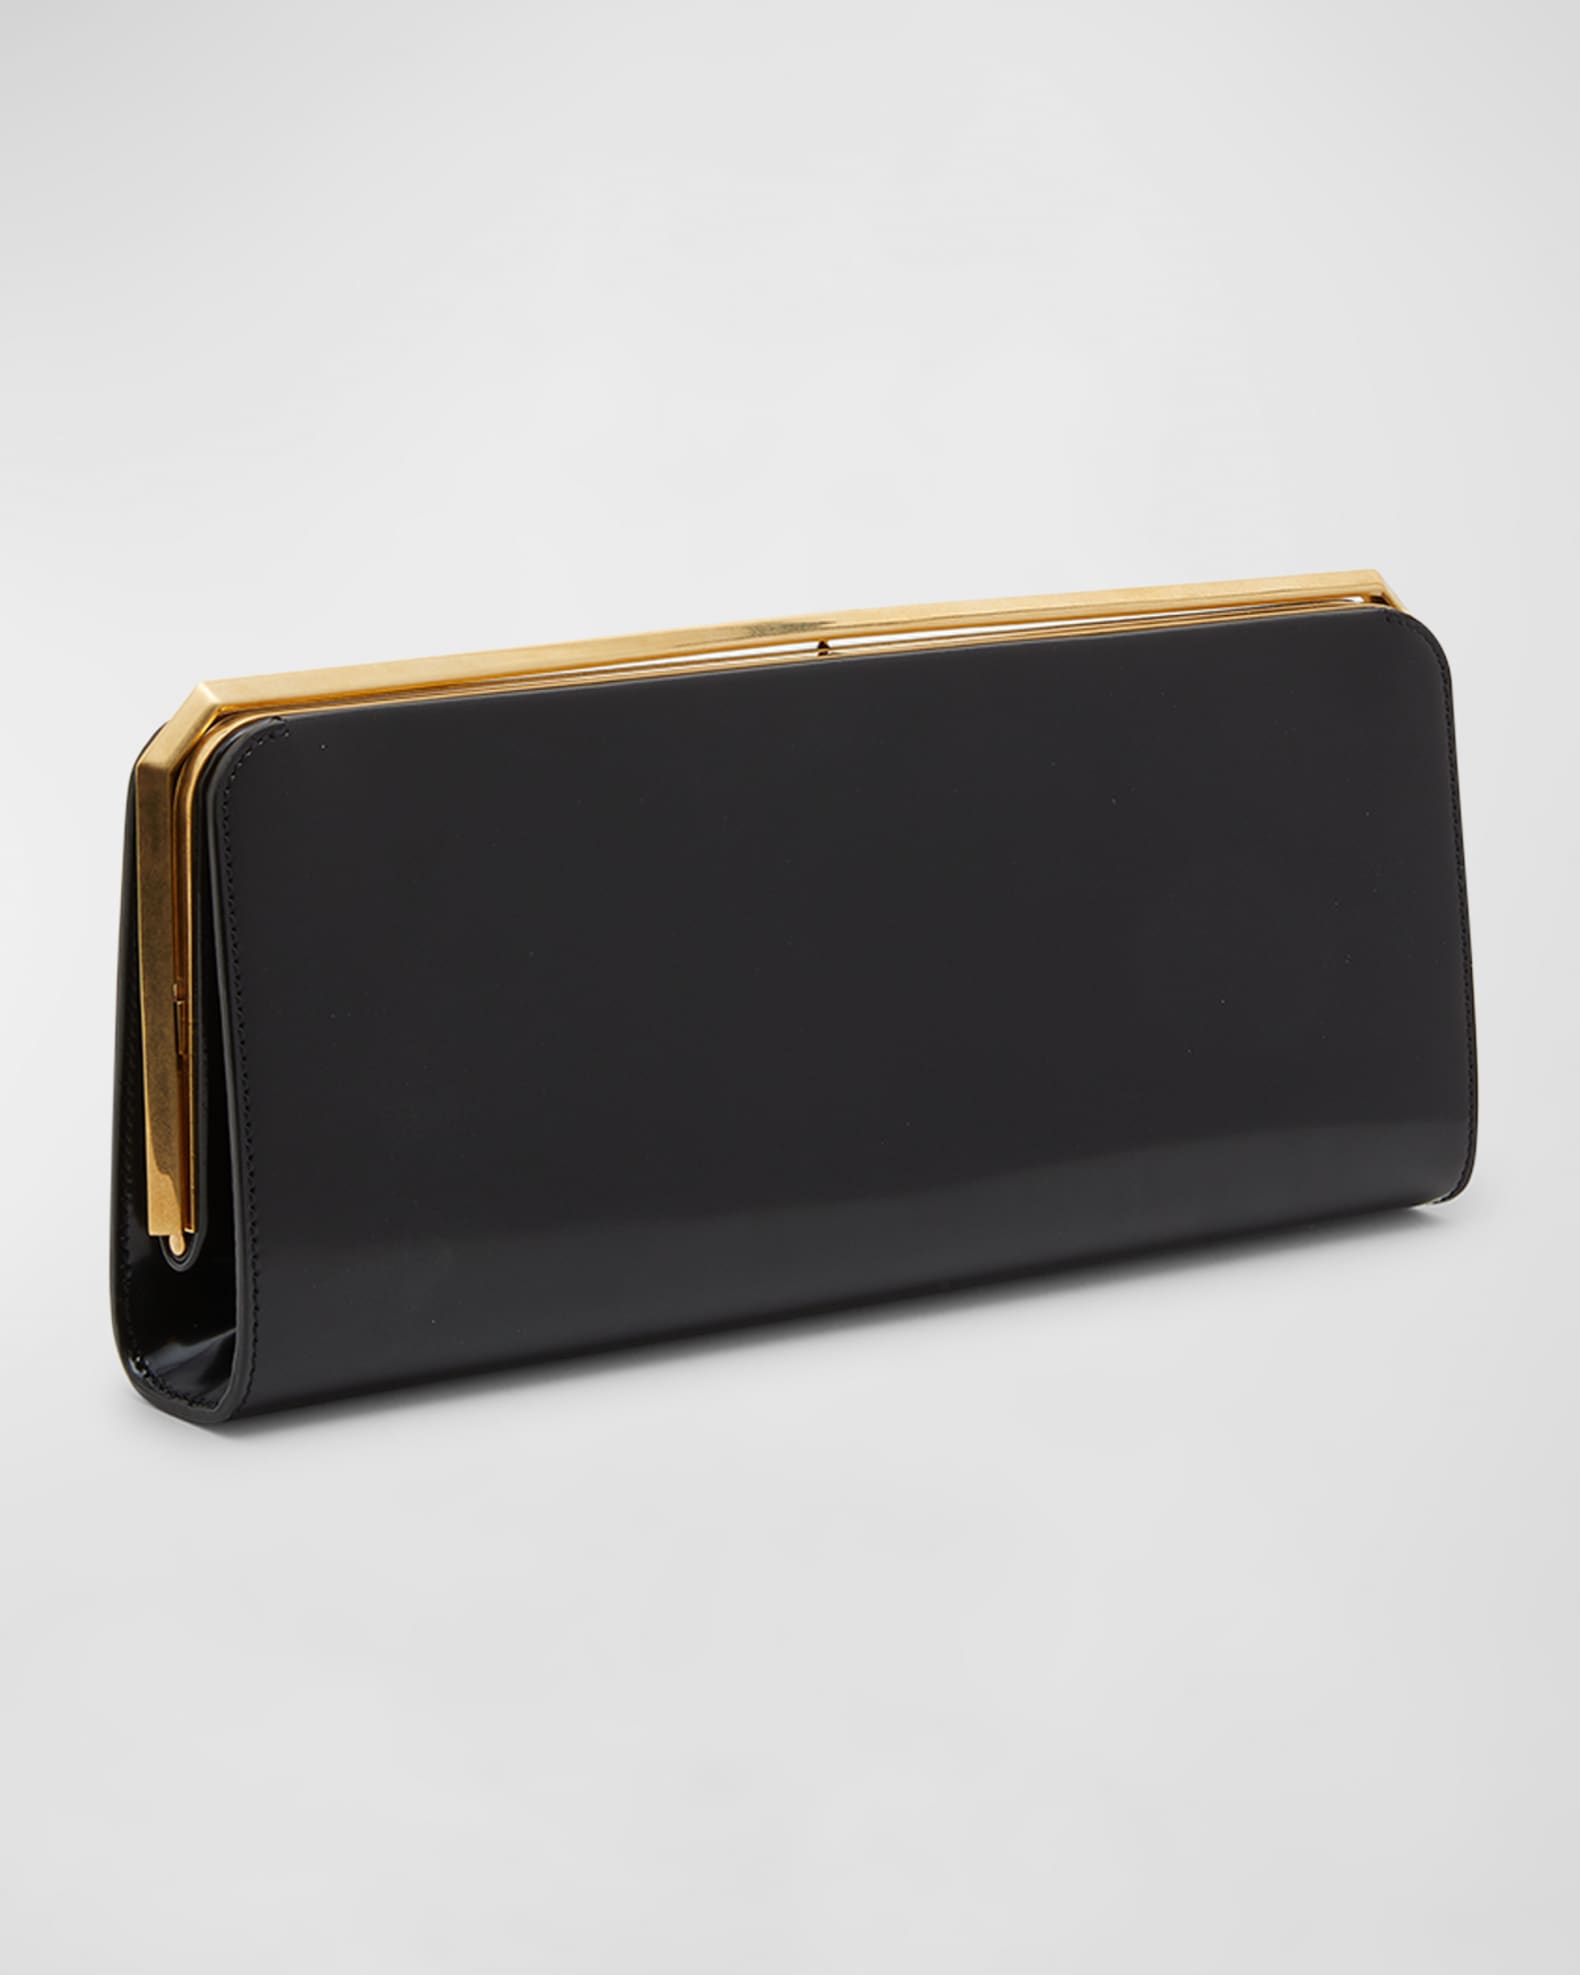 Designer Clutch Bags Online - Luxe Bridal Mother of Pearl Brass Clutch